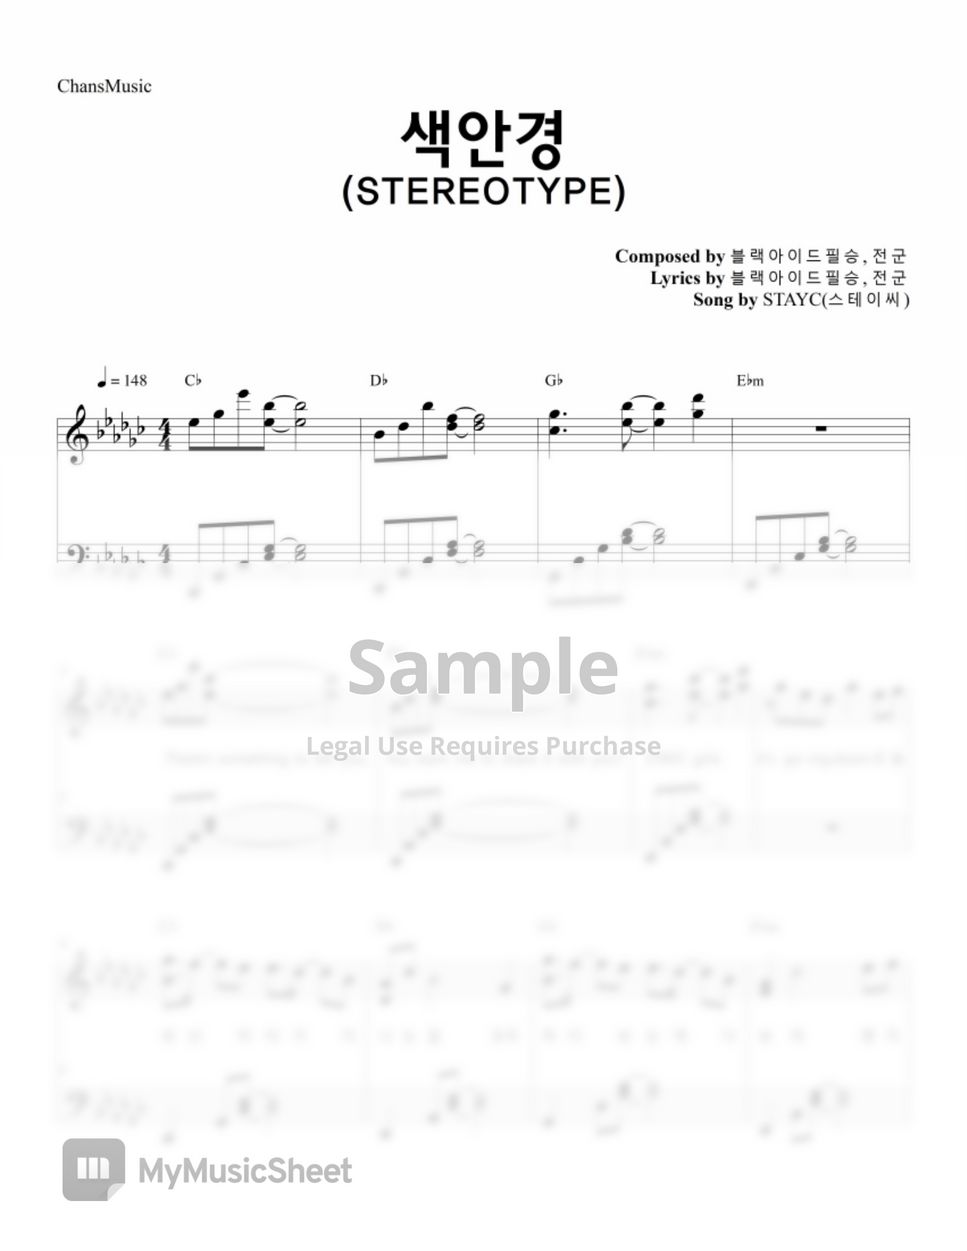 STAYC - STEREOTYPE (색안경) (코드, 가사 포함) by ChansMusic